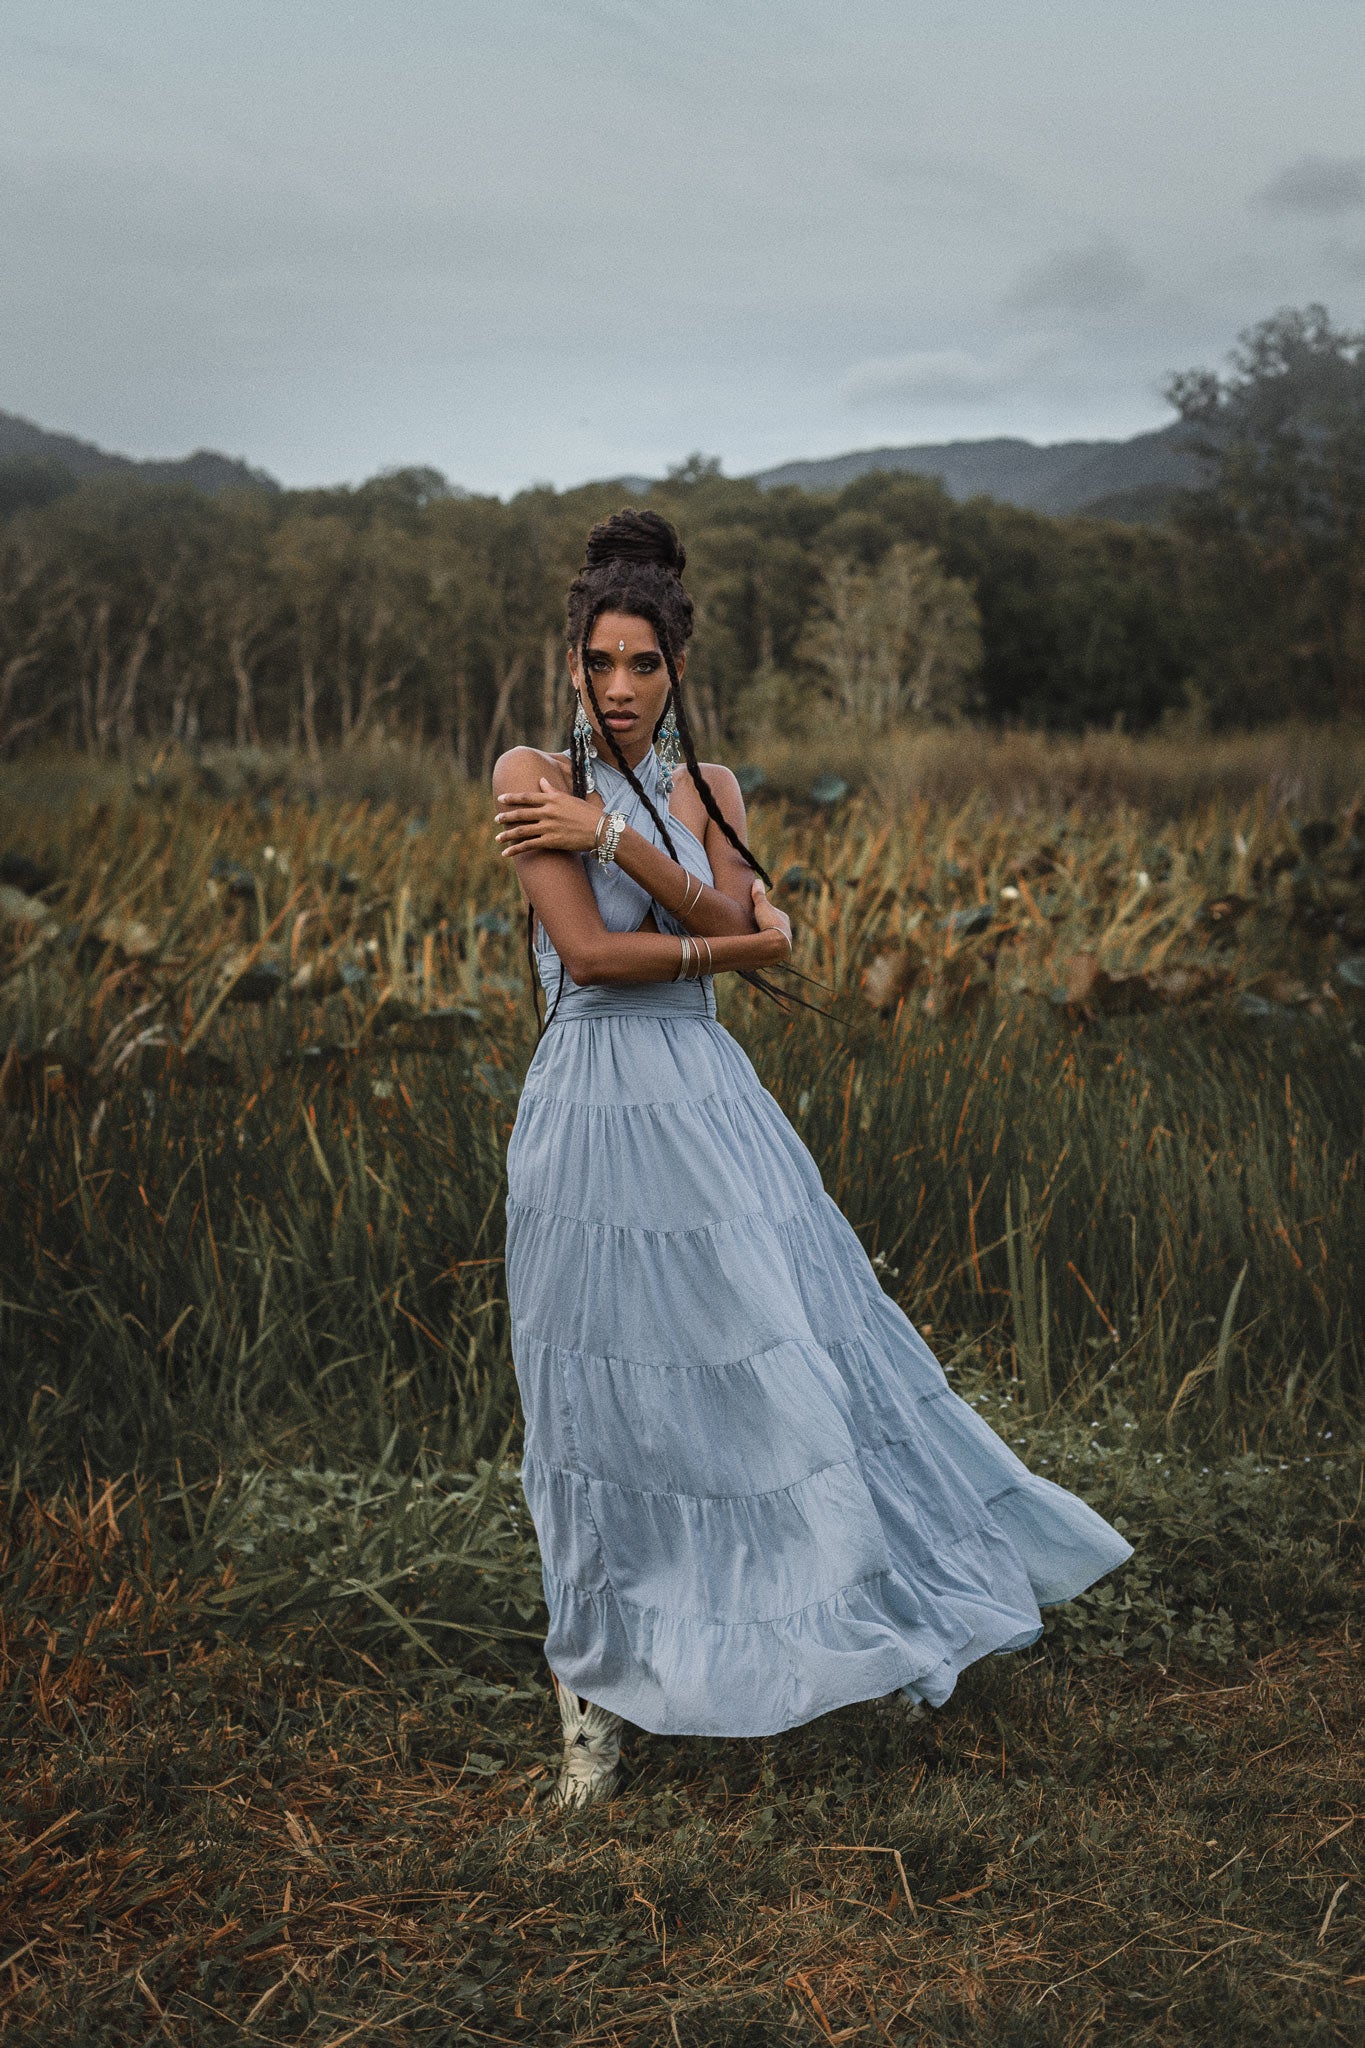 This boho evening dress is perfect for any special occasion. The light blue color and adjustable straps make it both unique and stylish.